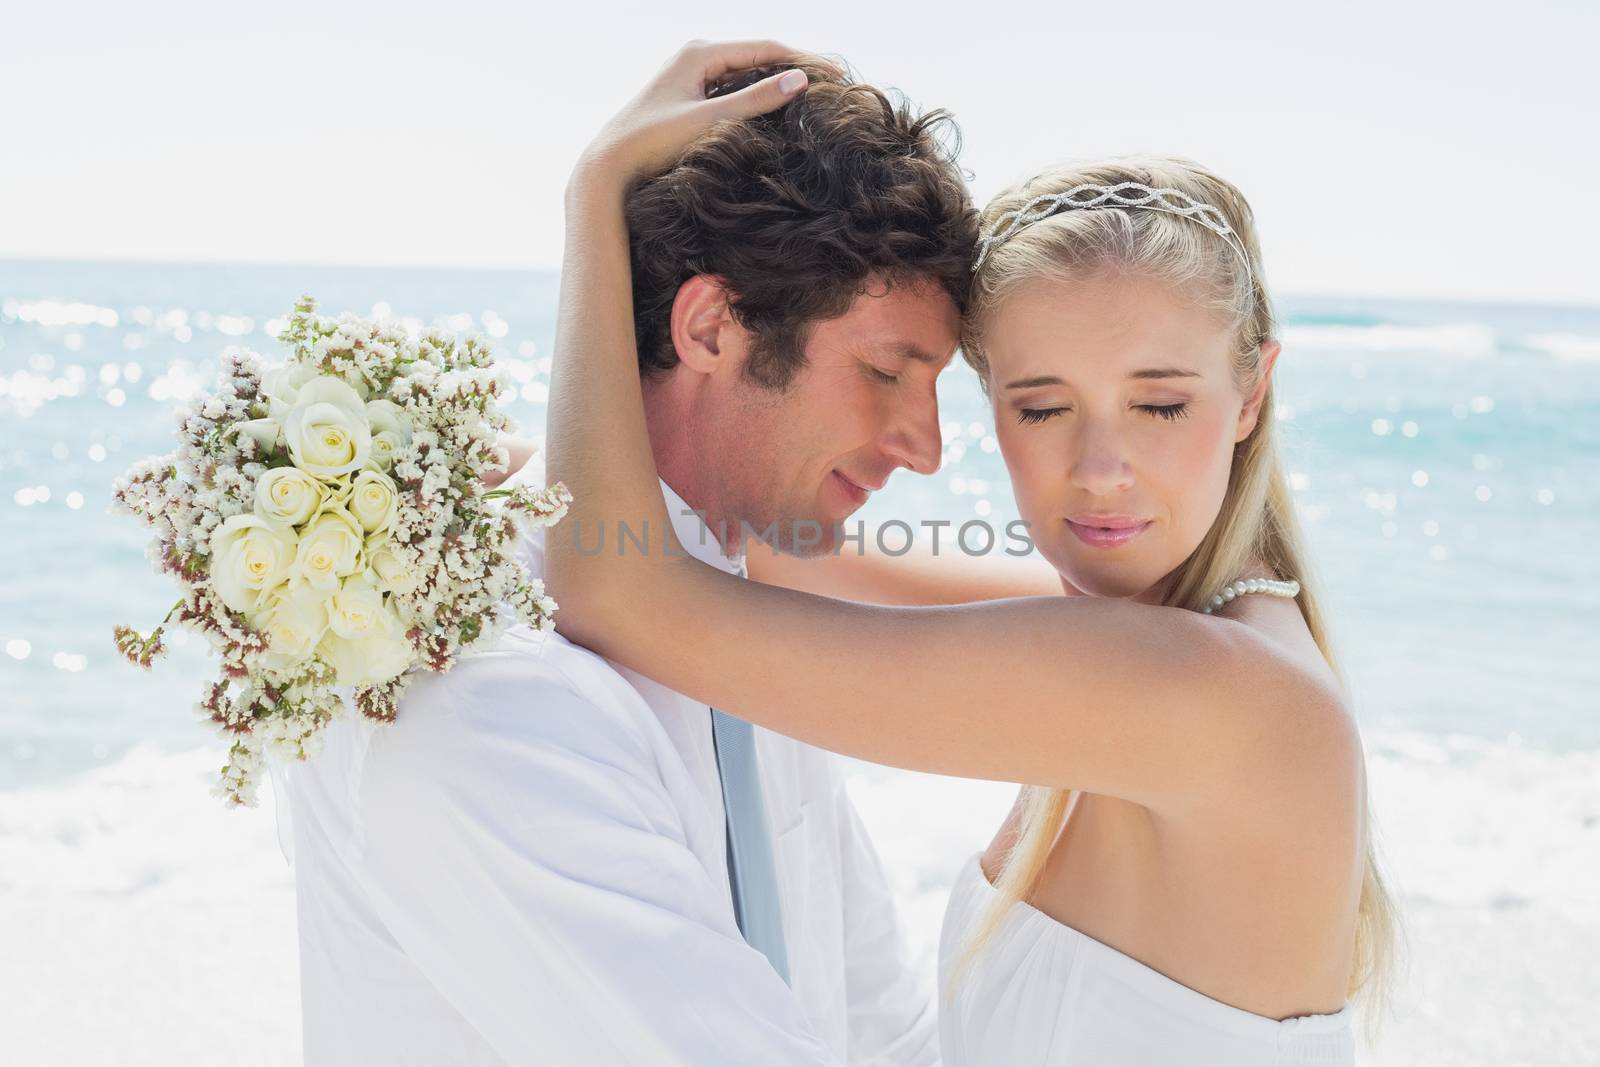 Romantic couple embracing on their wedding day at the beach